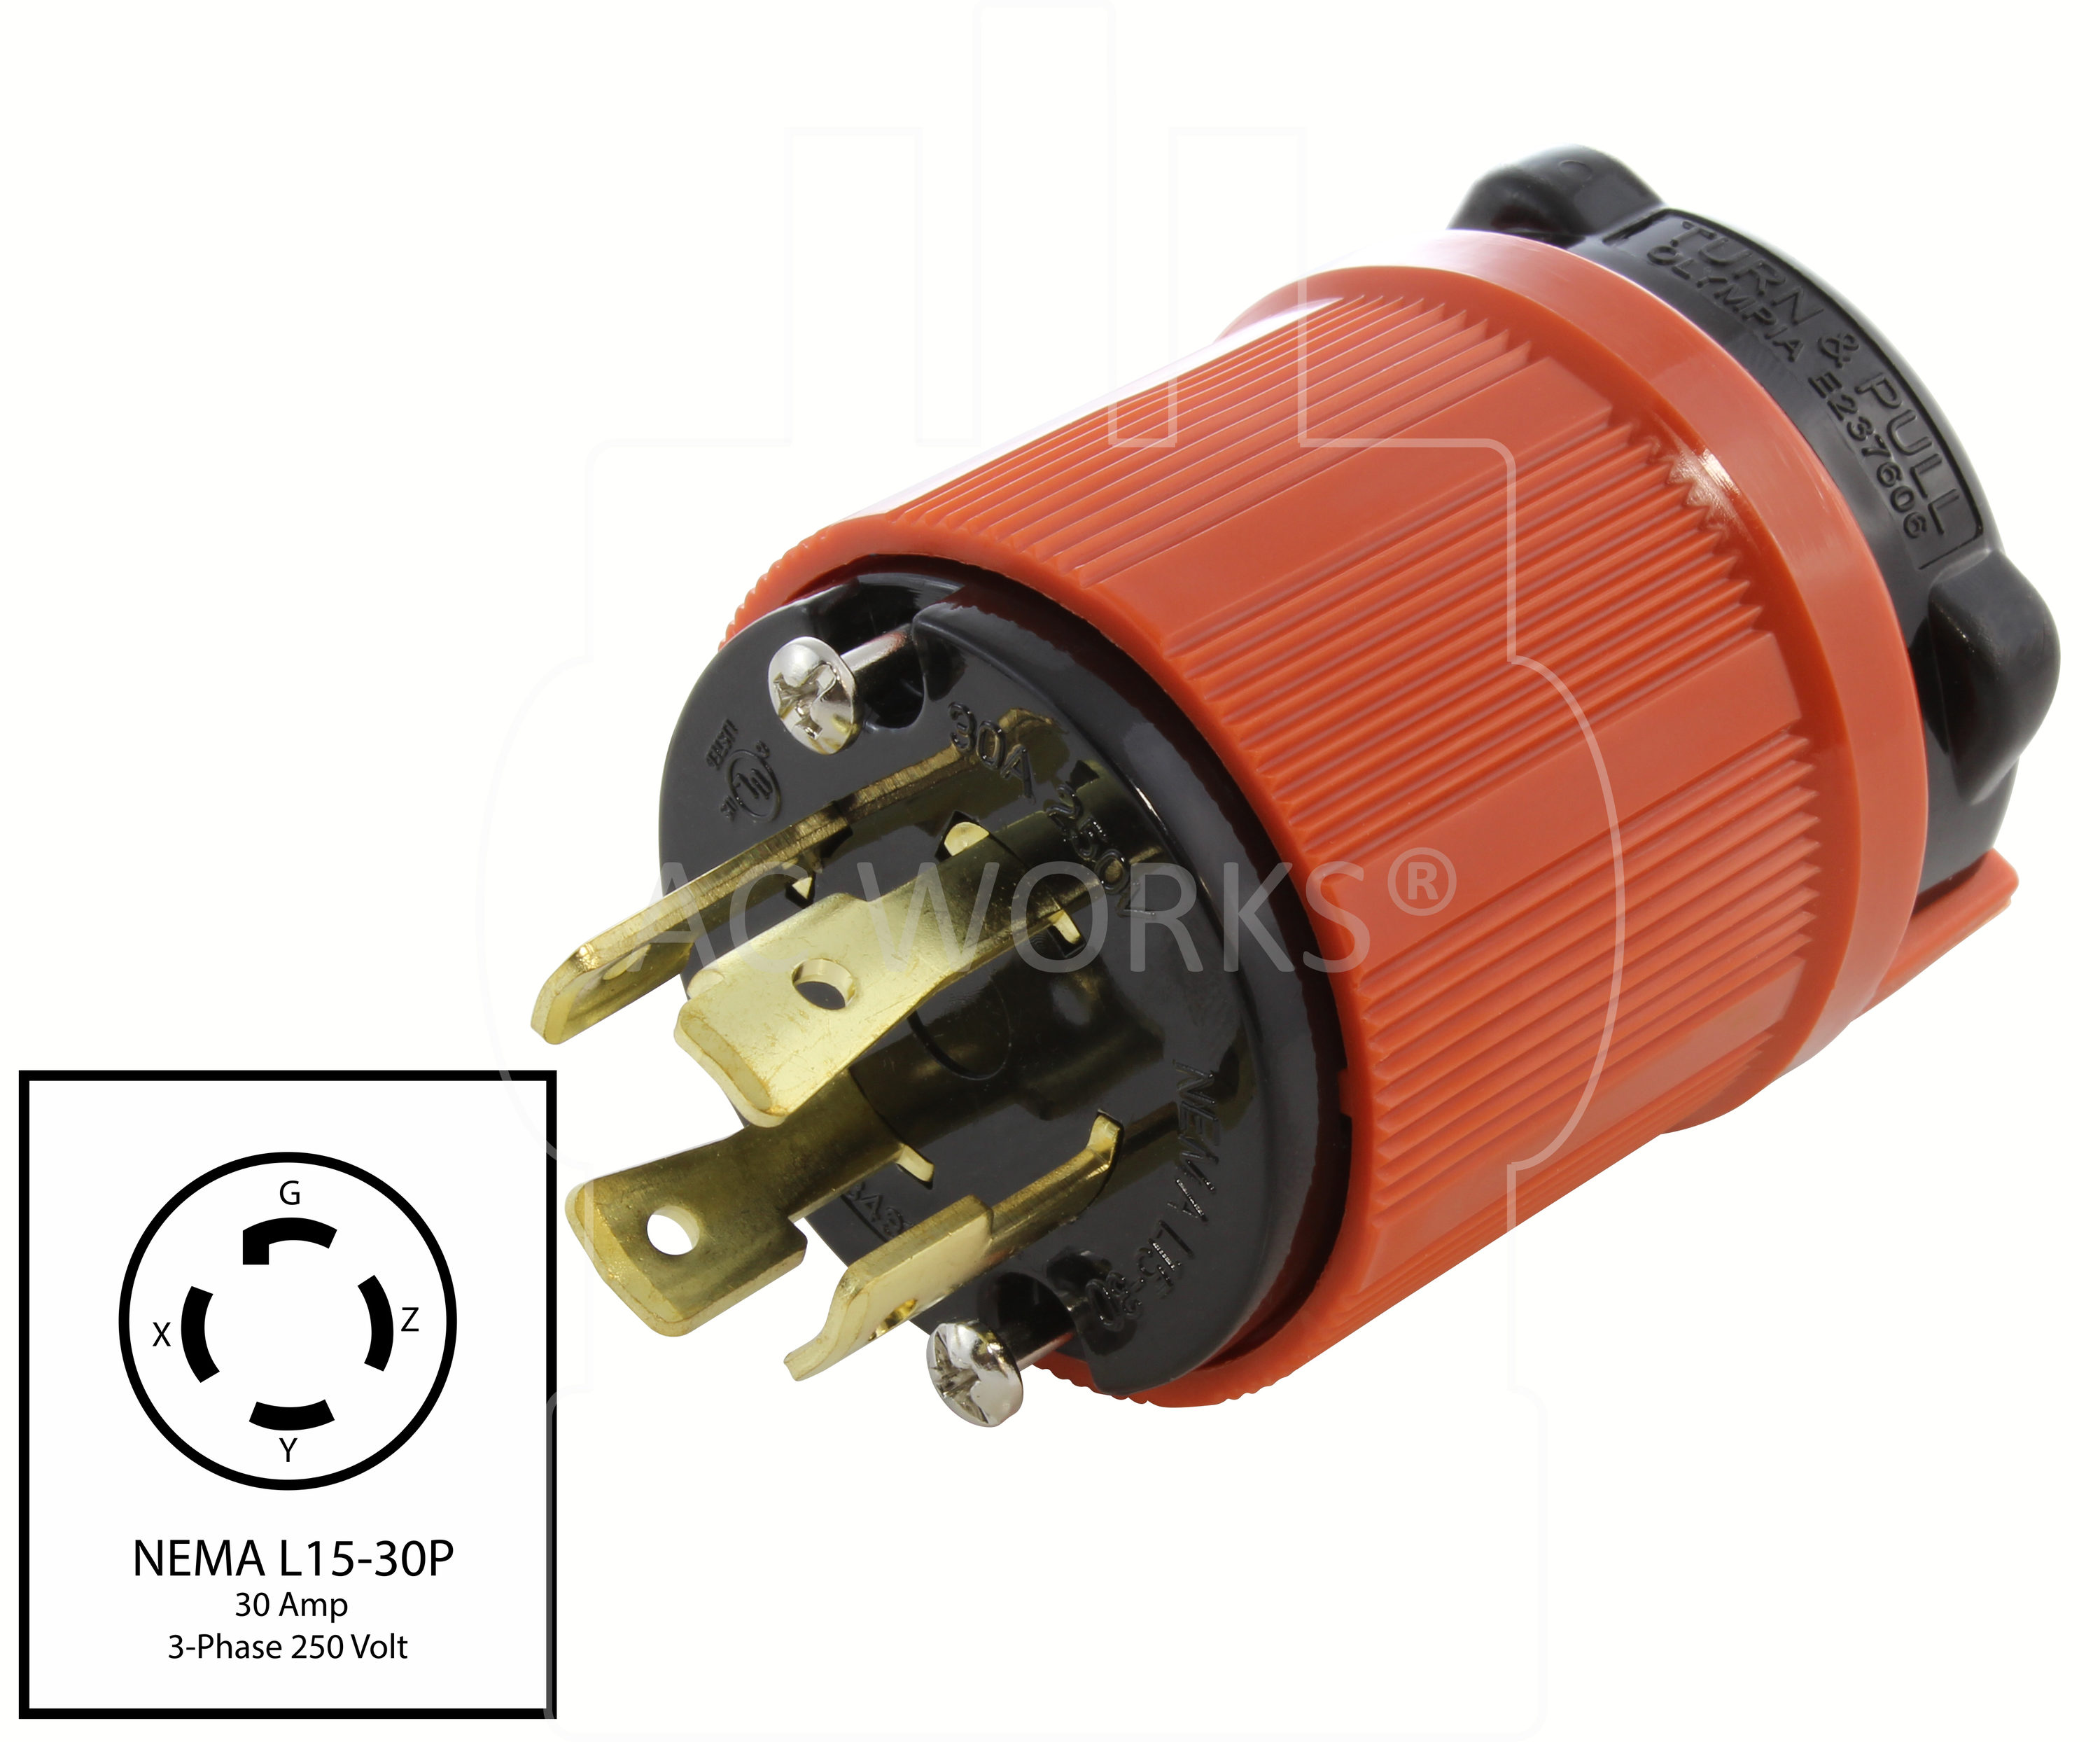 20 Amp 3-Phase 250 Volt NEMA L15-20R DIY Replacement Outlet by AC WORKS® 